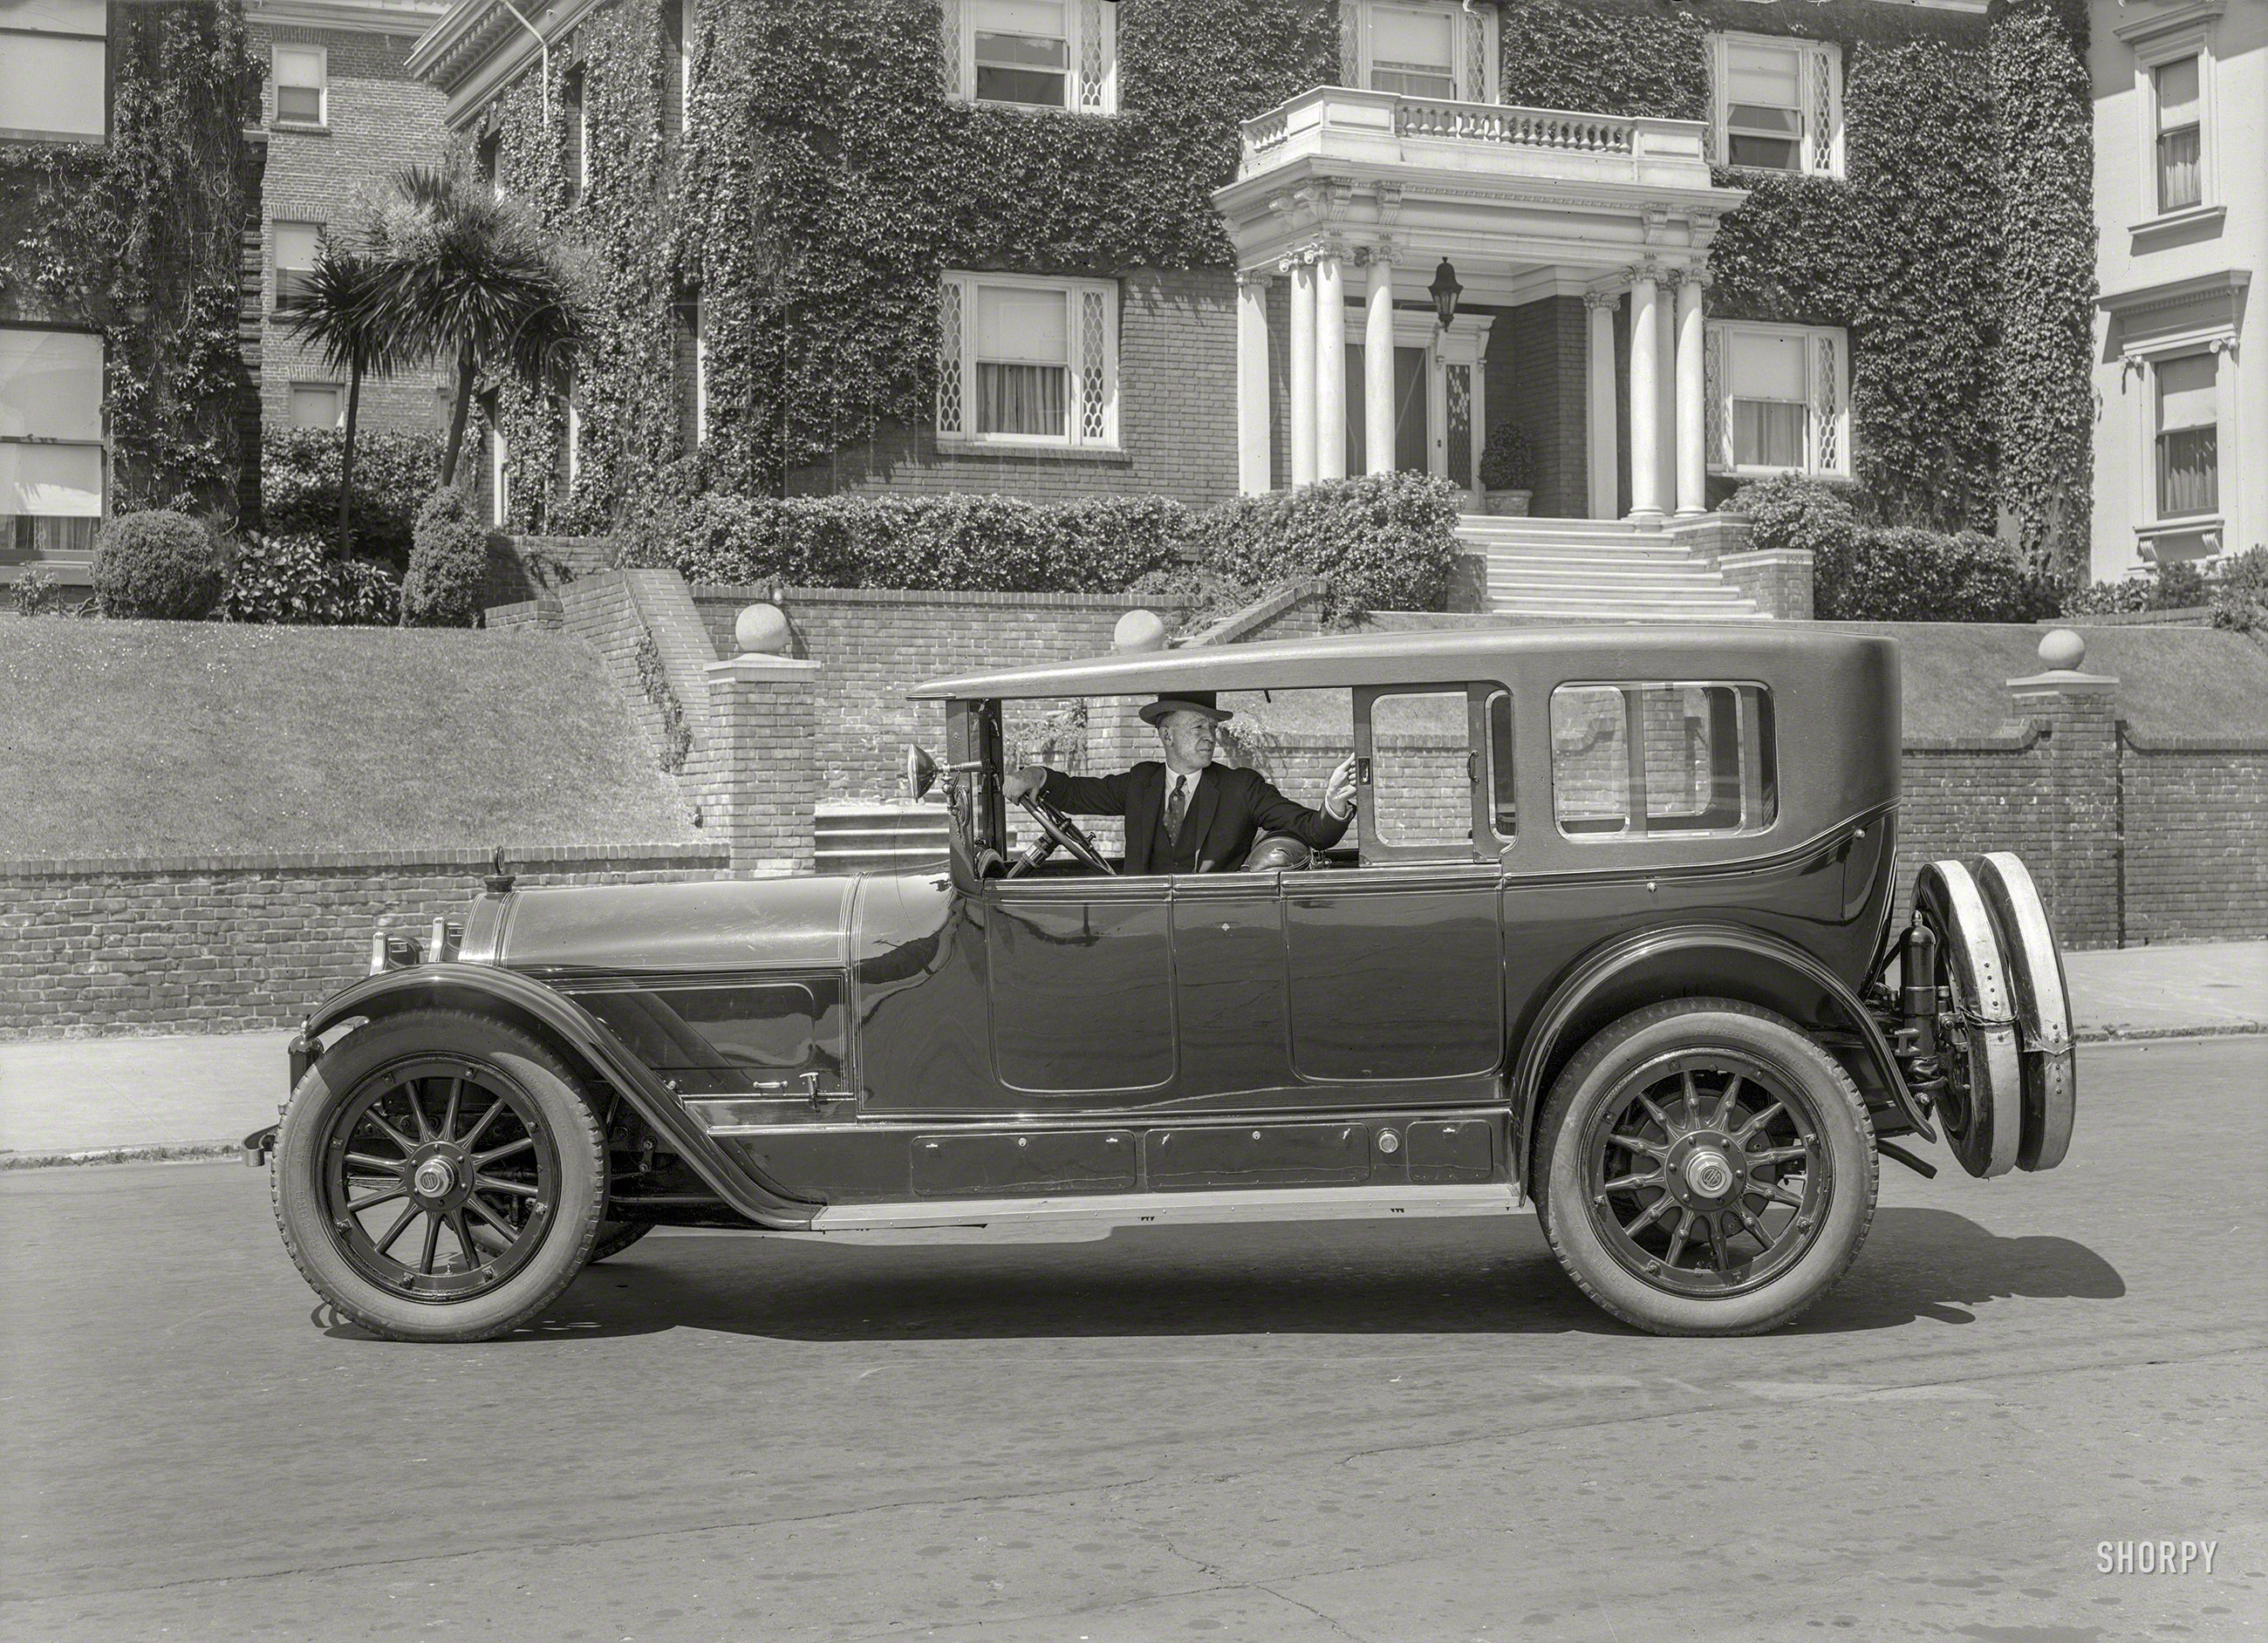 San Francisco circa 1920. "Locomobile touring sedan." An expensive open car fortified against the elements with yet another variation on the so-called "California top." 5x7 inch glass negative by Christopher Helin. View full size.